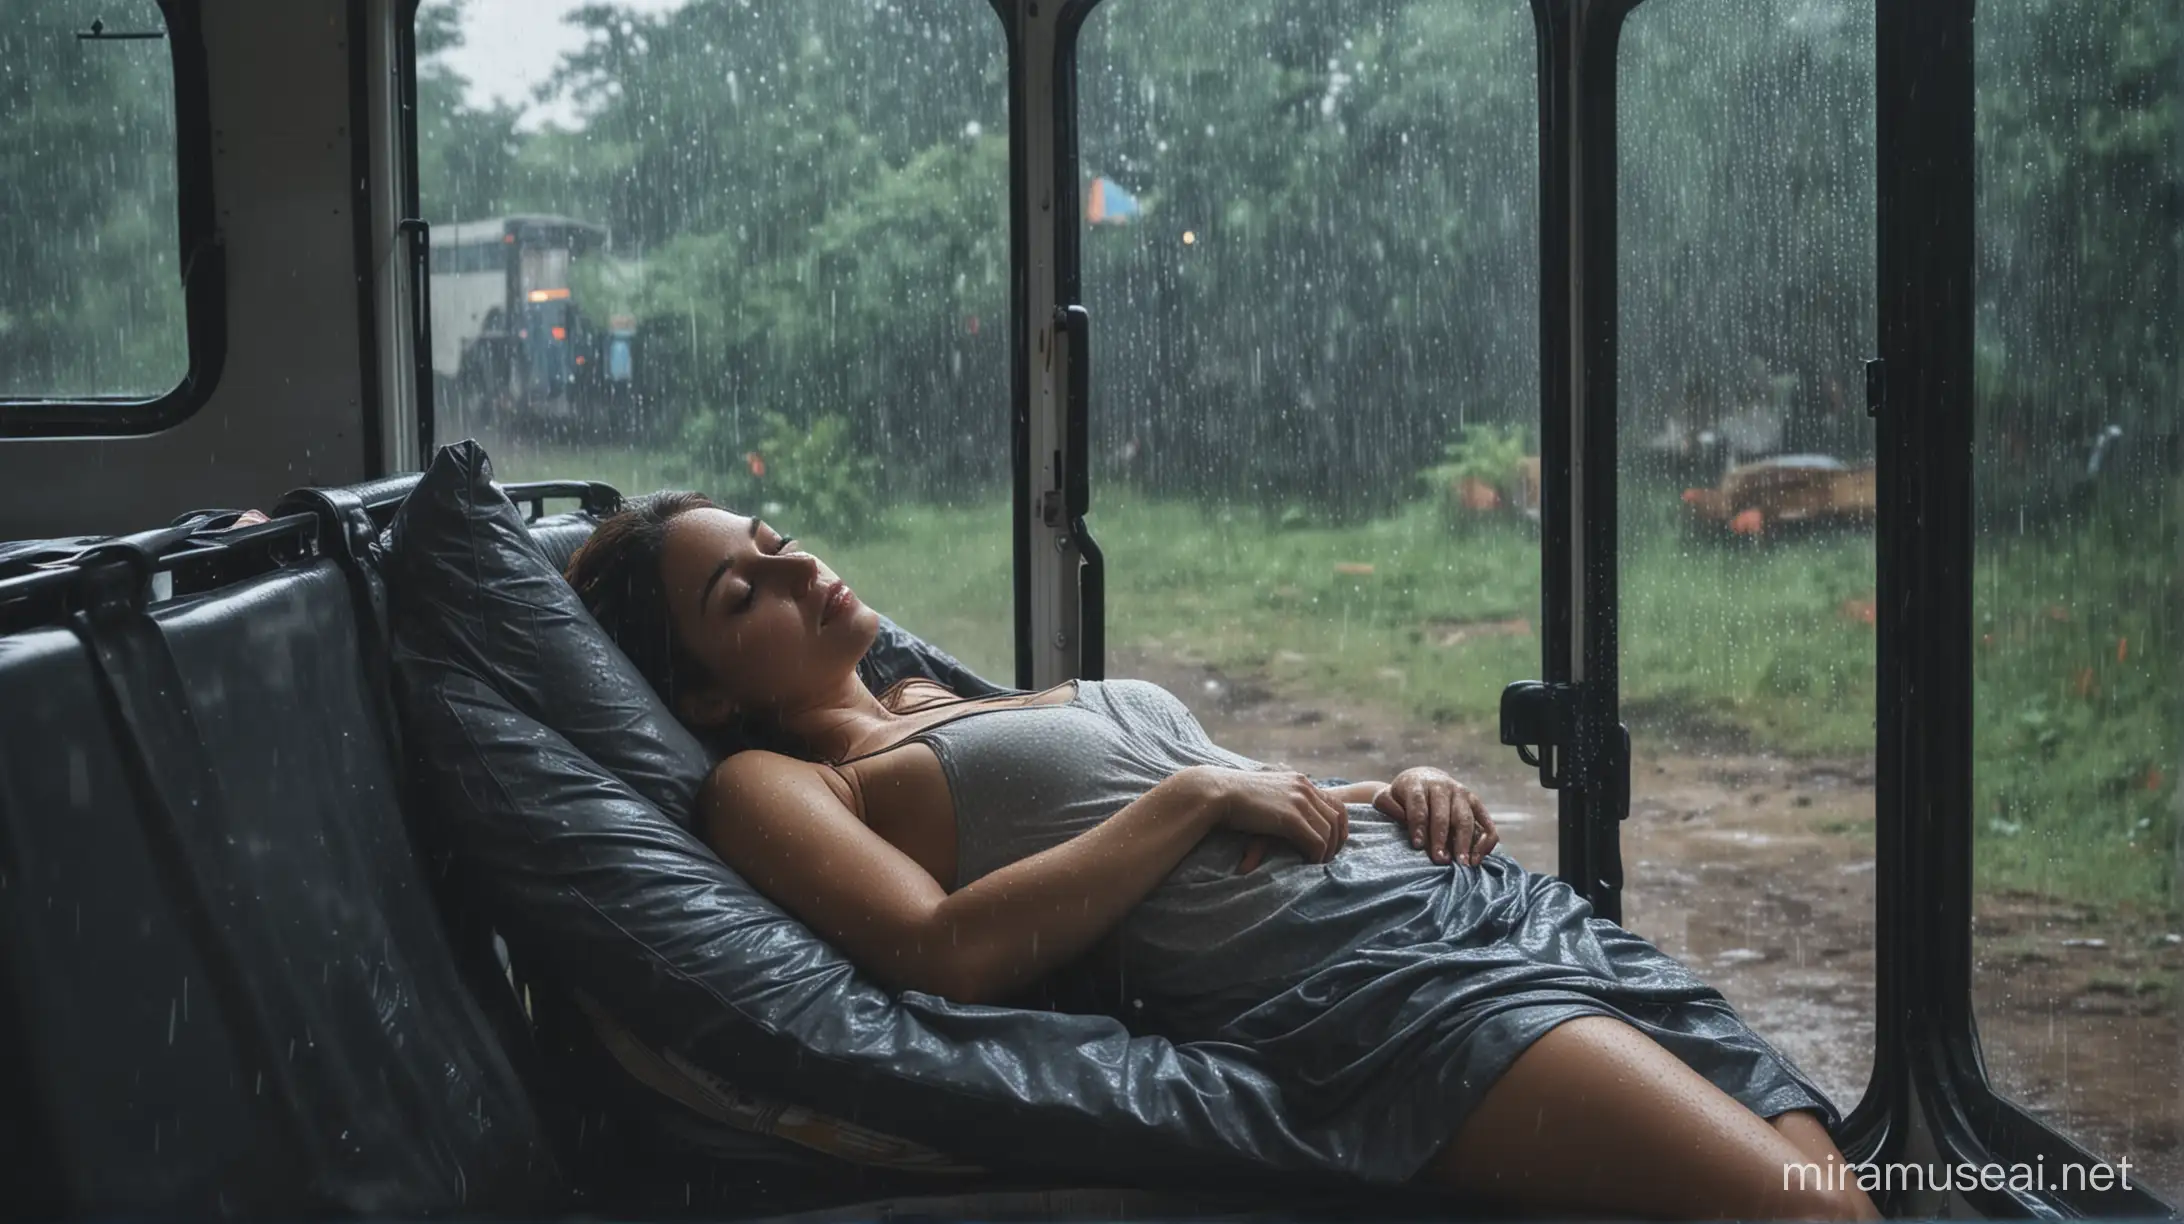 Sensual Woman Napping in Rainy Bus at Campsite